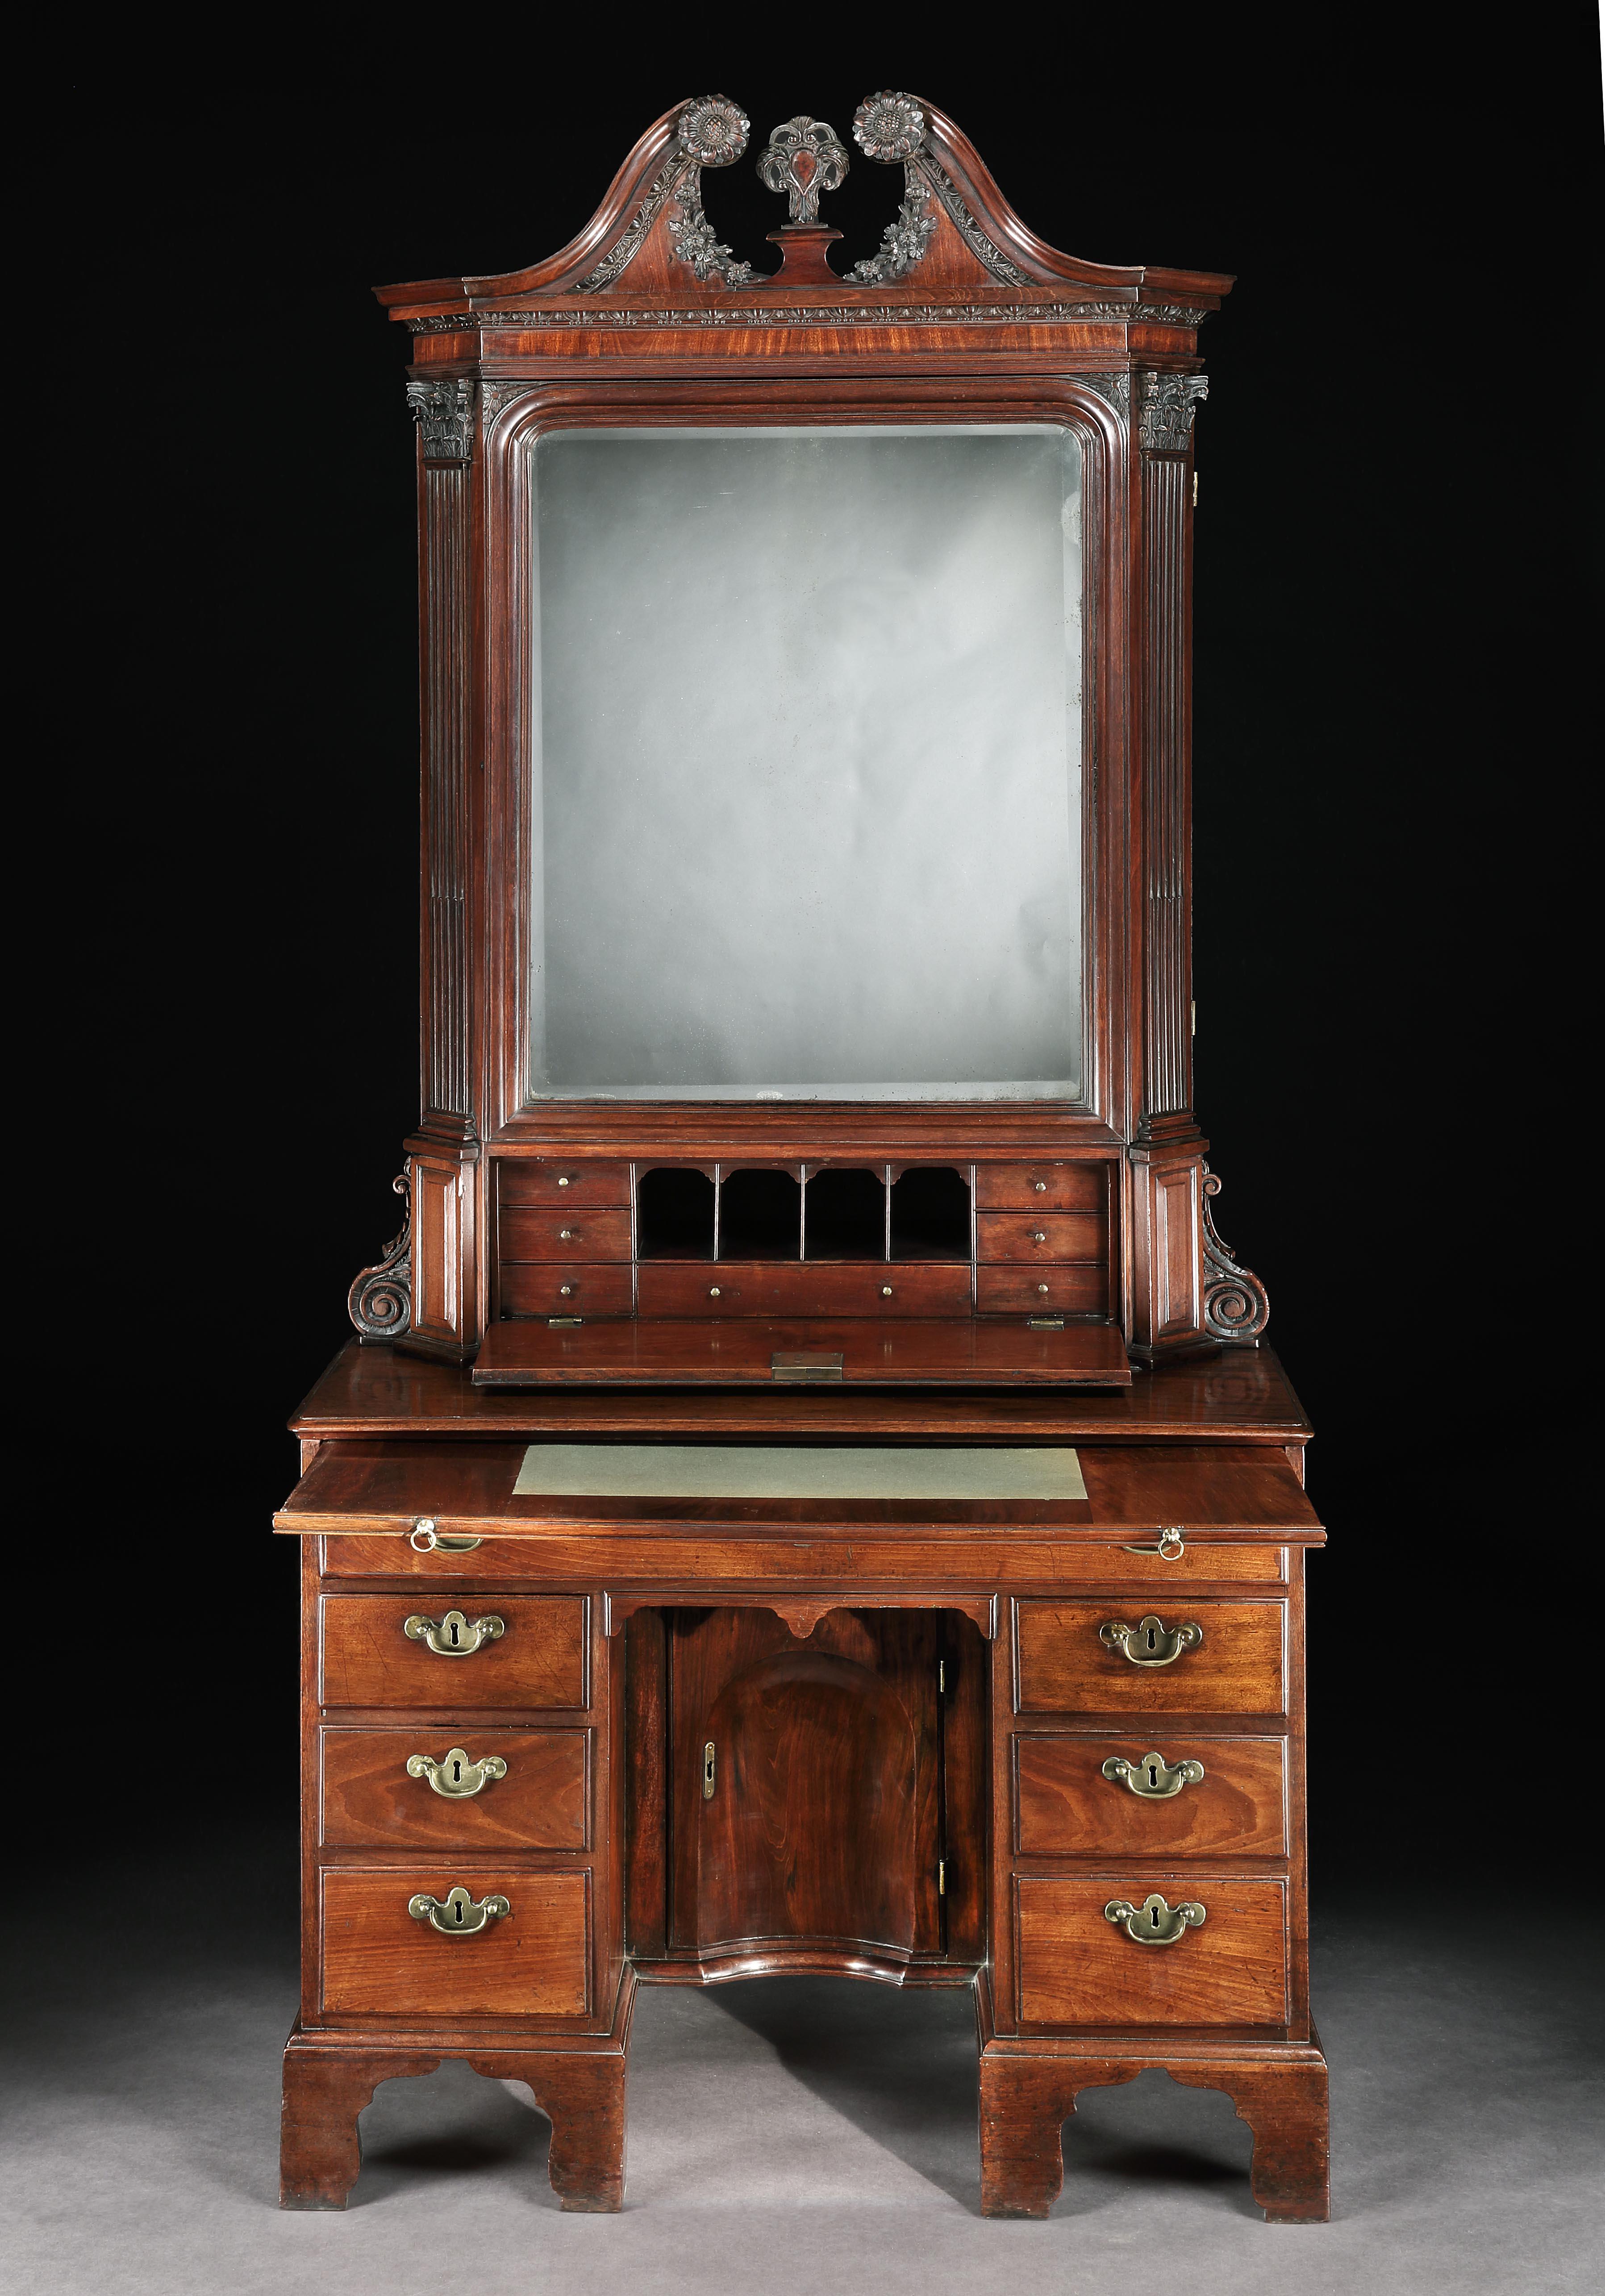 A rare 18th century Irish mahogany knee-hole cabinet. The superbly carved swan neck cornice with Irish sunflowers carved garlands of flowers and an egg and dart mouldings, above a single original glass door flanked by Corinthian columns, with a